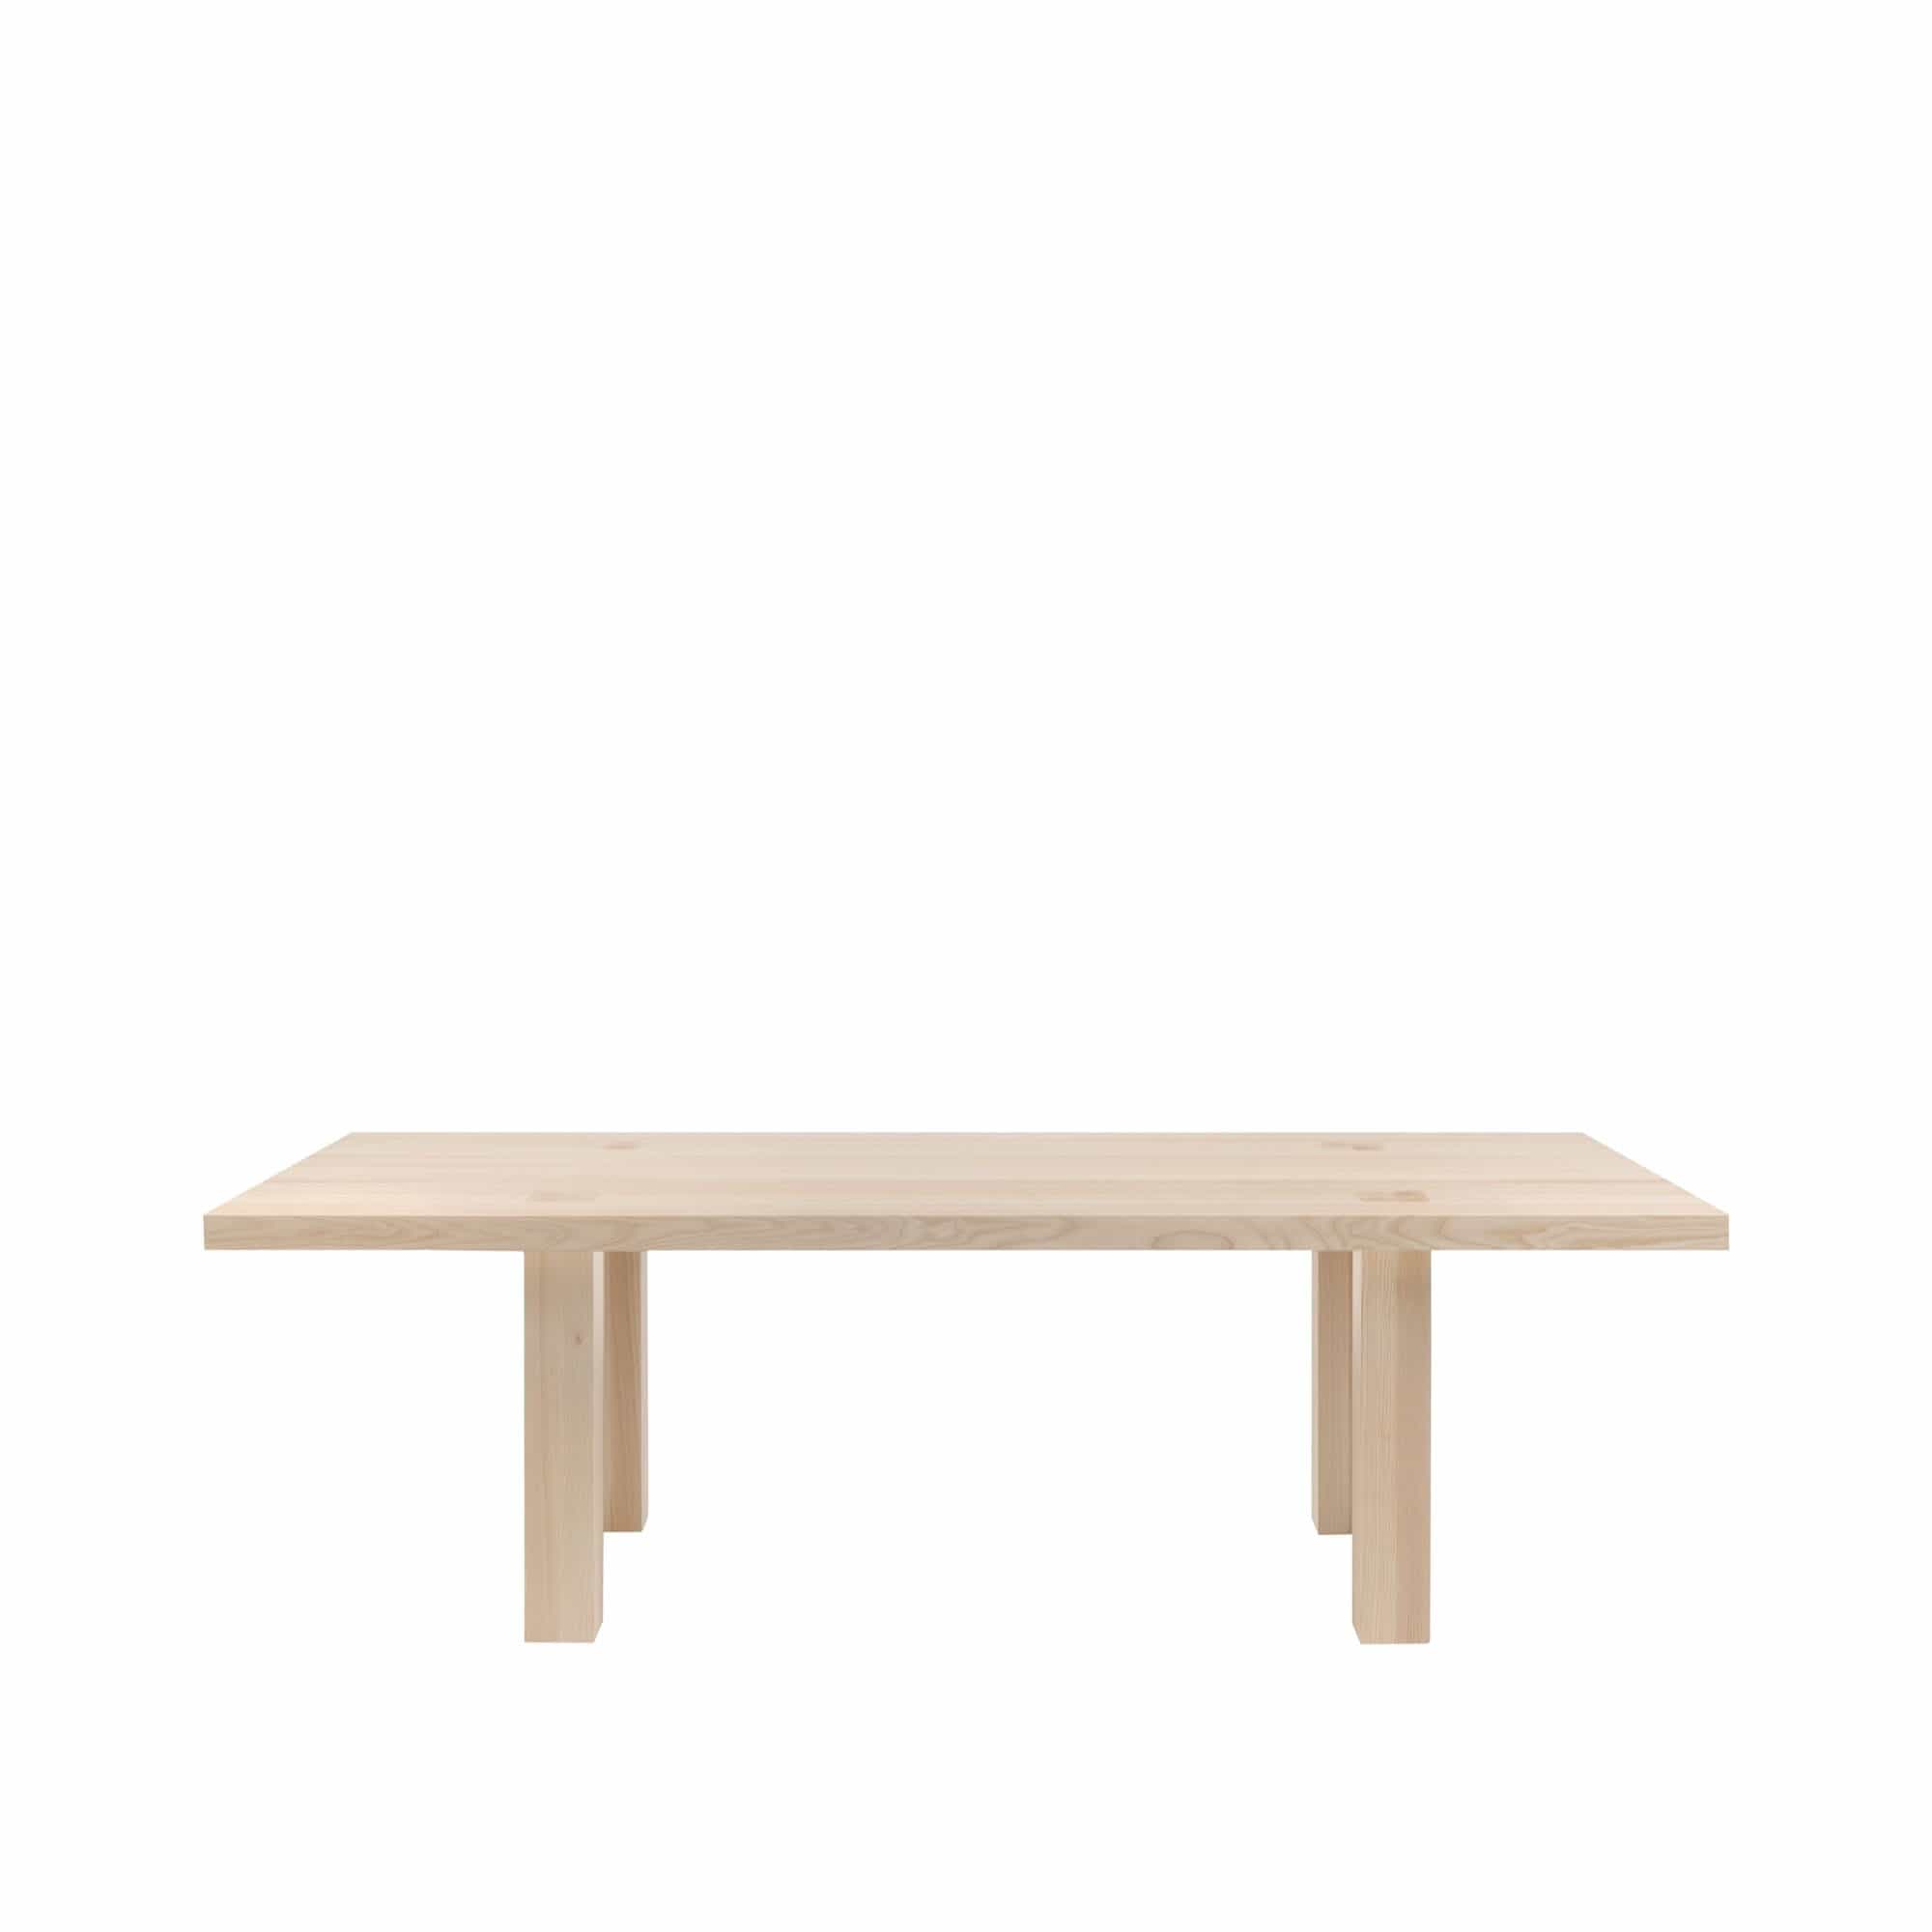 Max Table